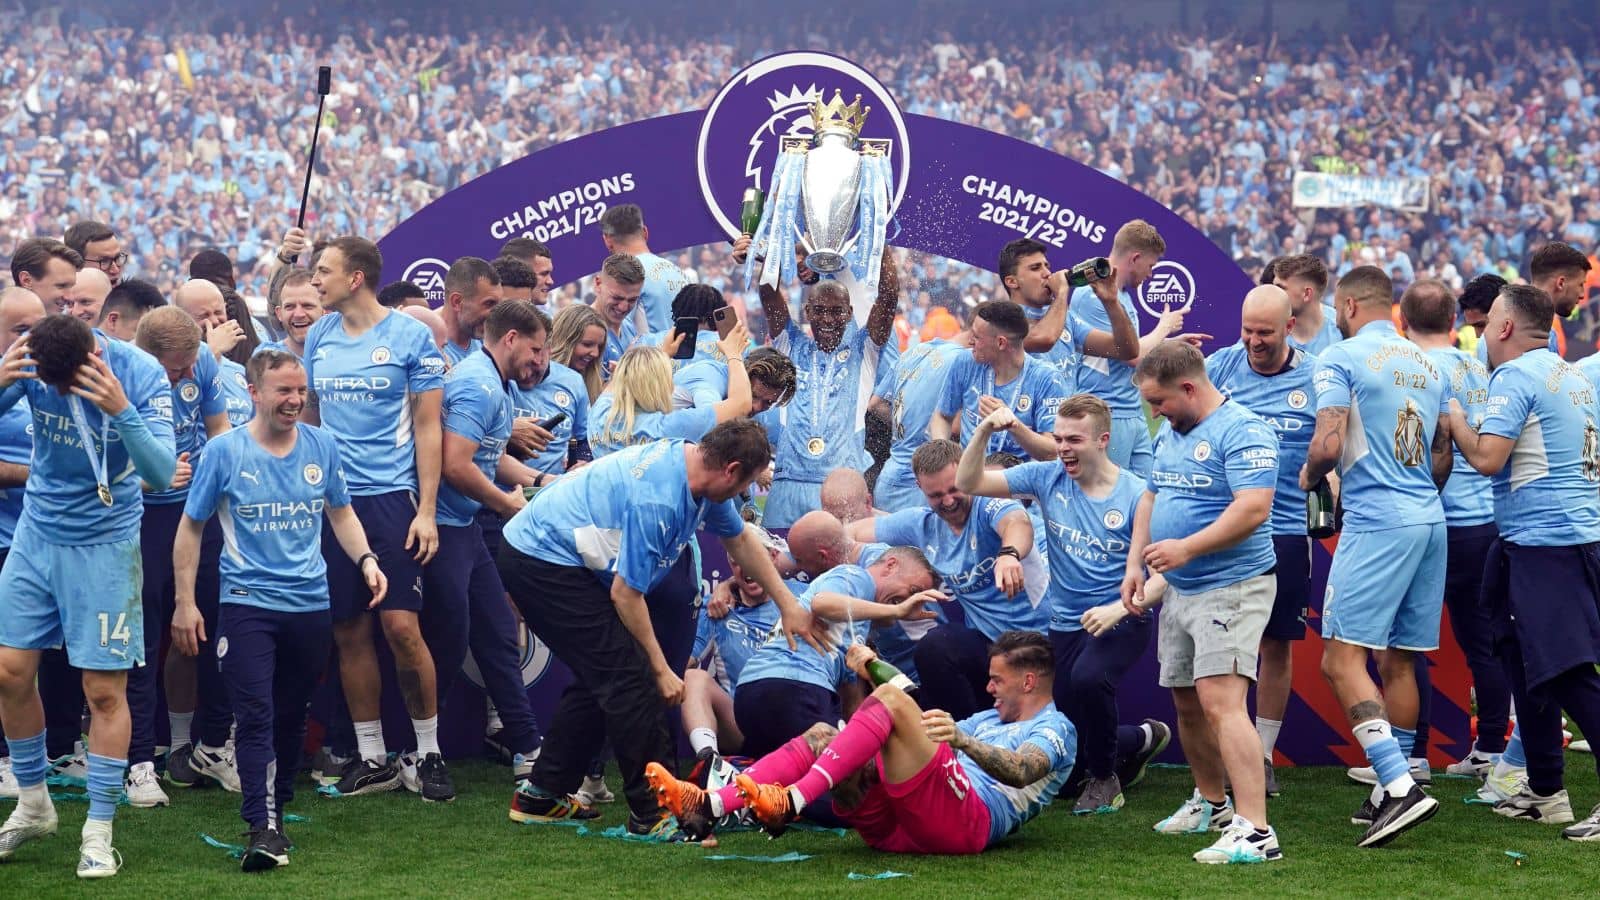 Pep Guardiola reaction: 'We are legends' as Man City boss also pays special tribute to Liverpool after dramatic title win